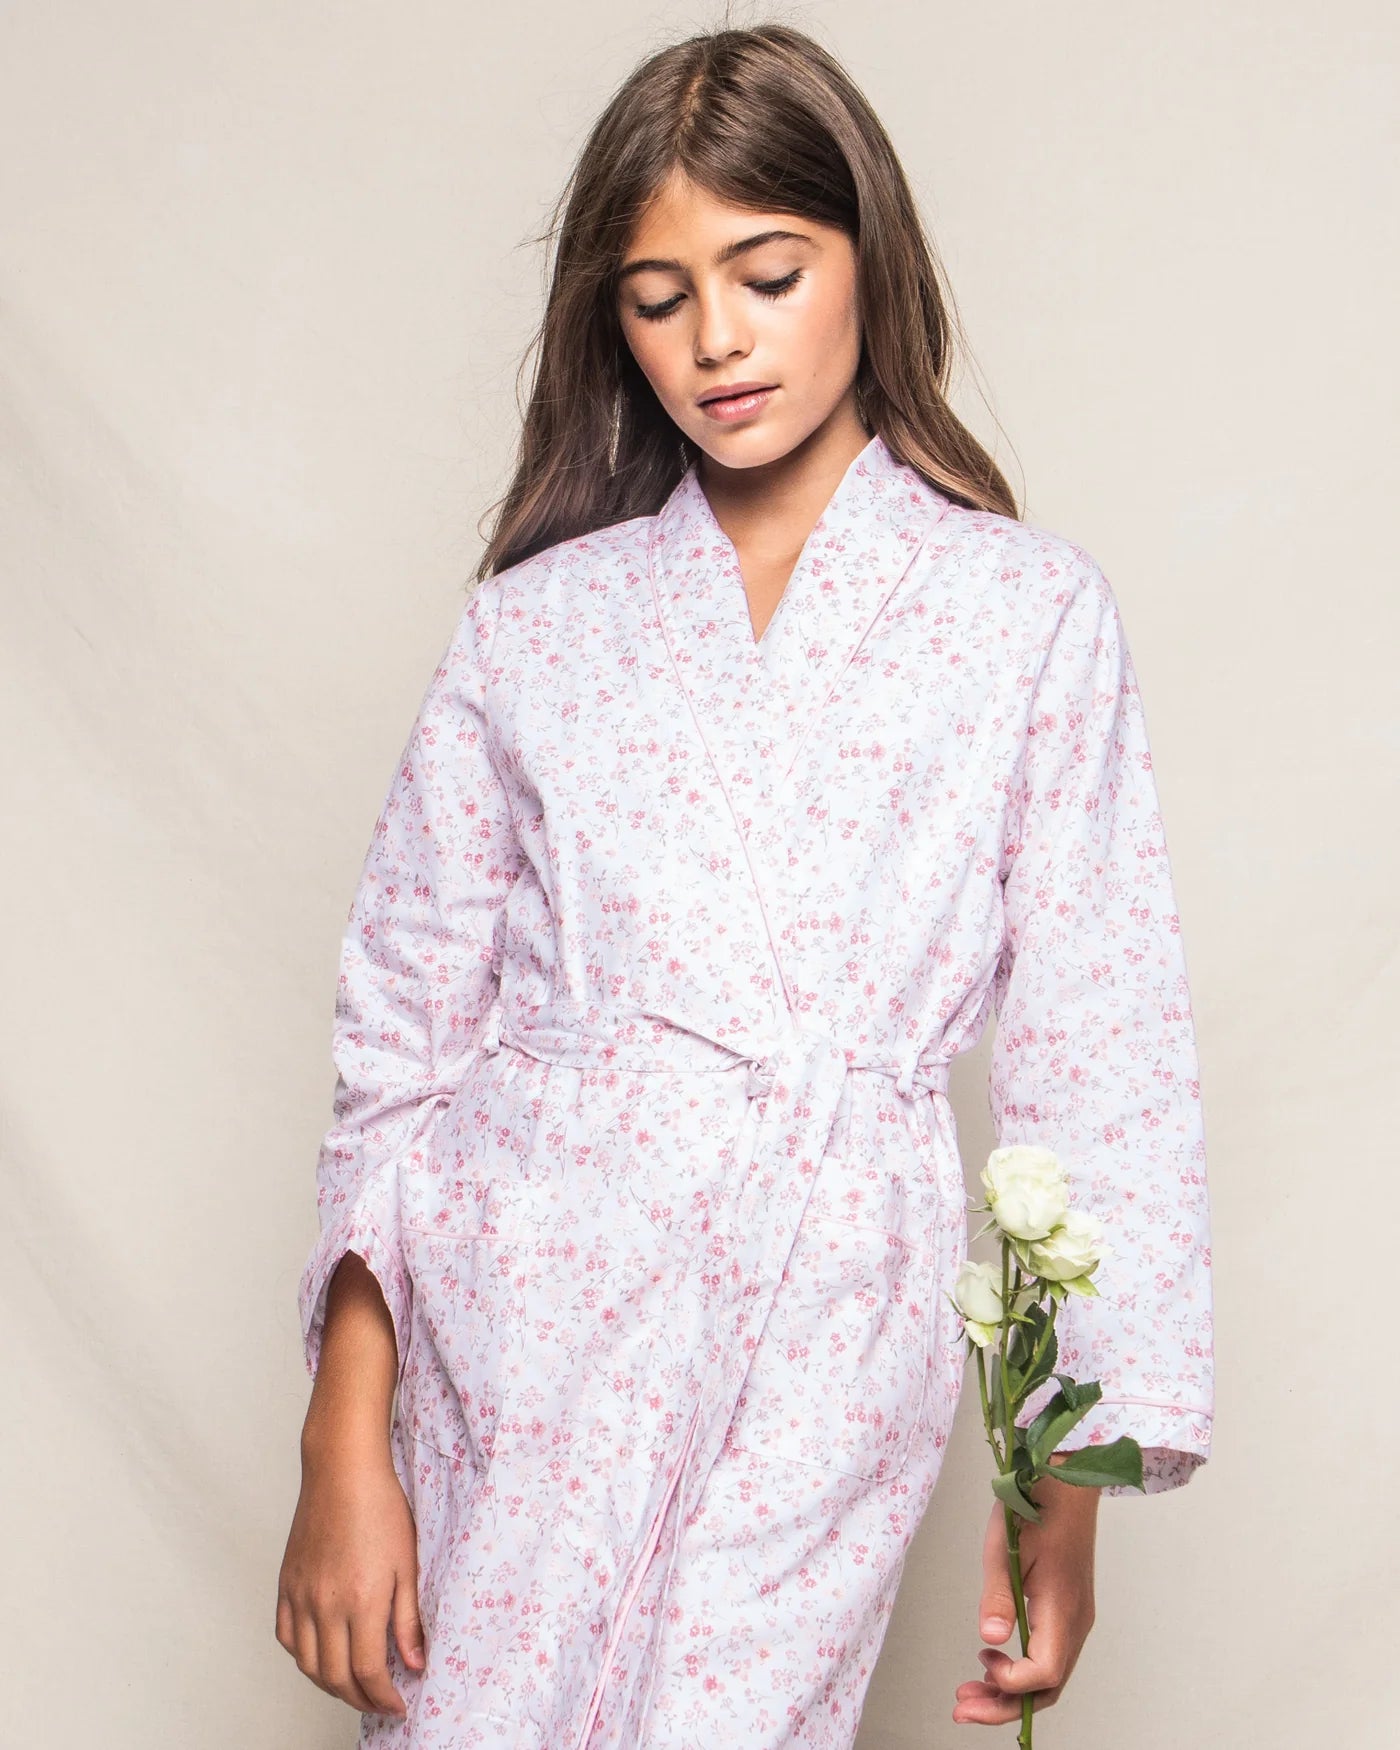 Kid's Twill Robe in Dorset Floral